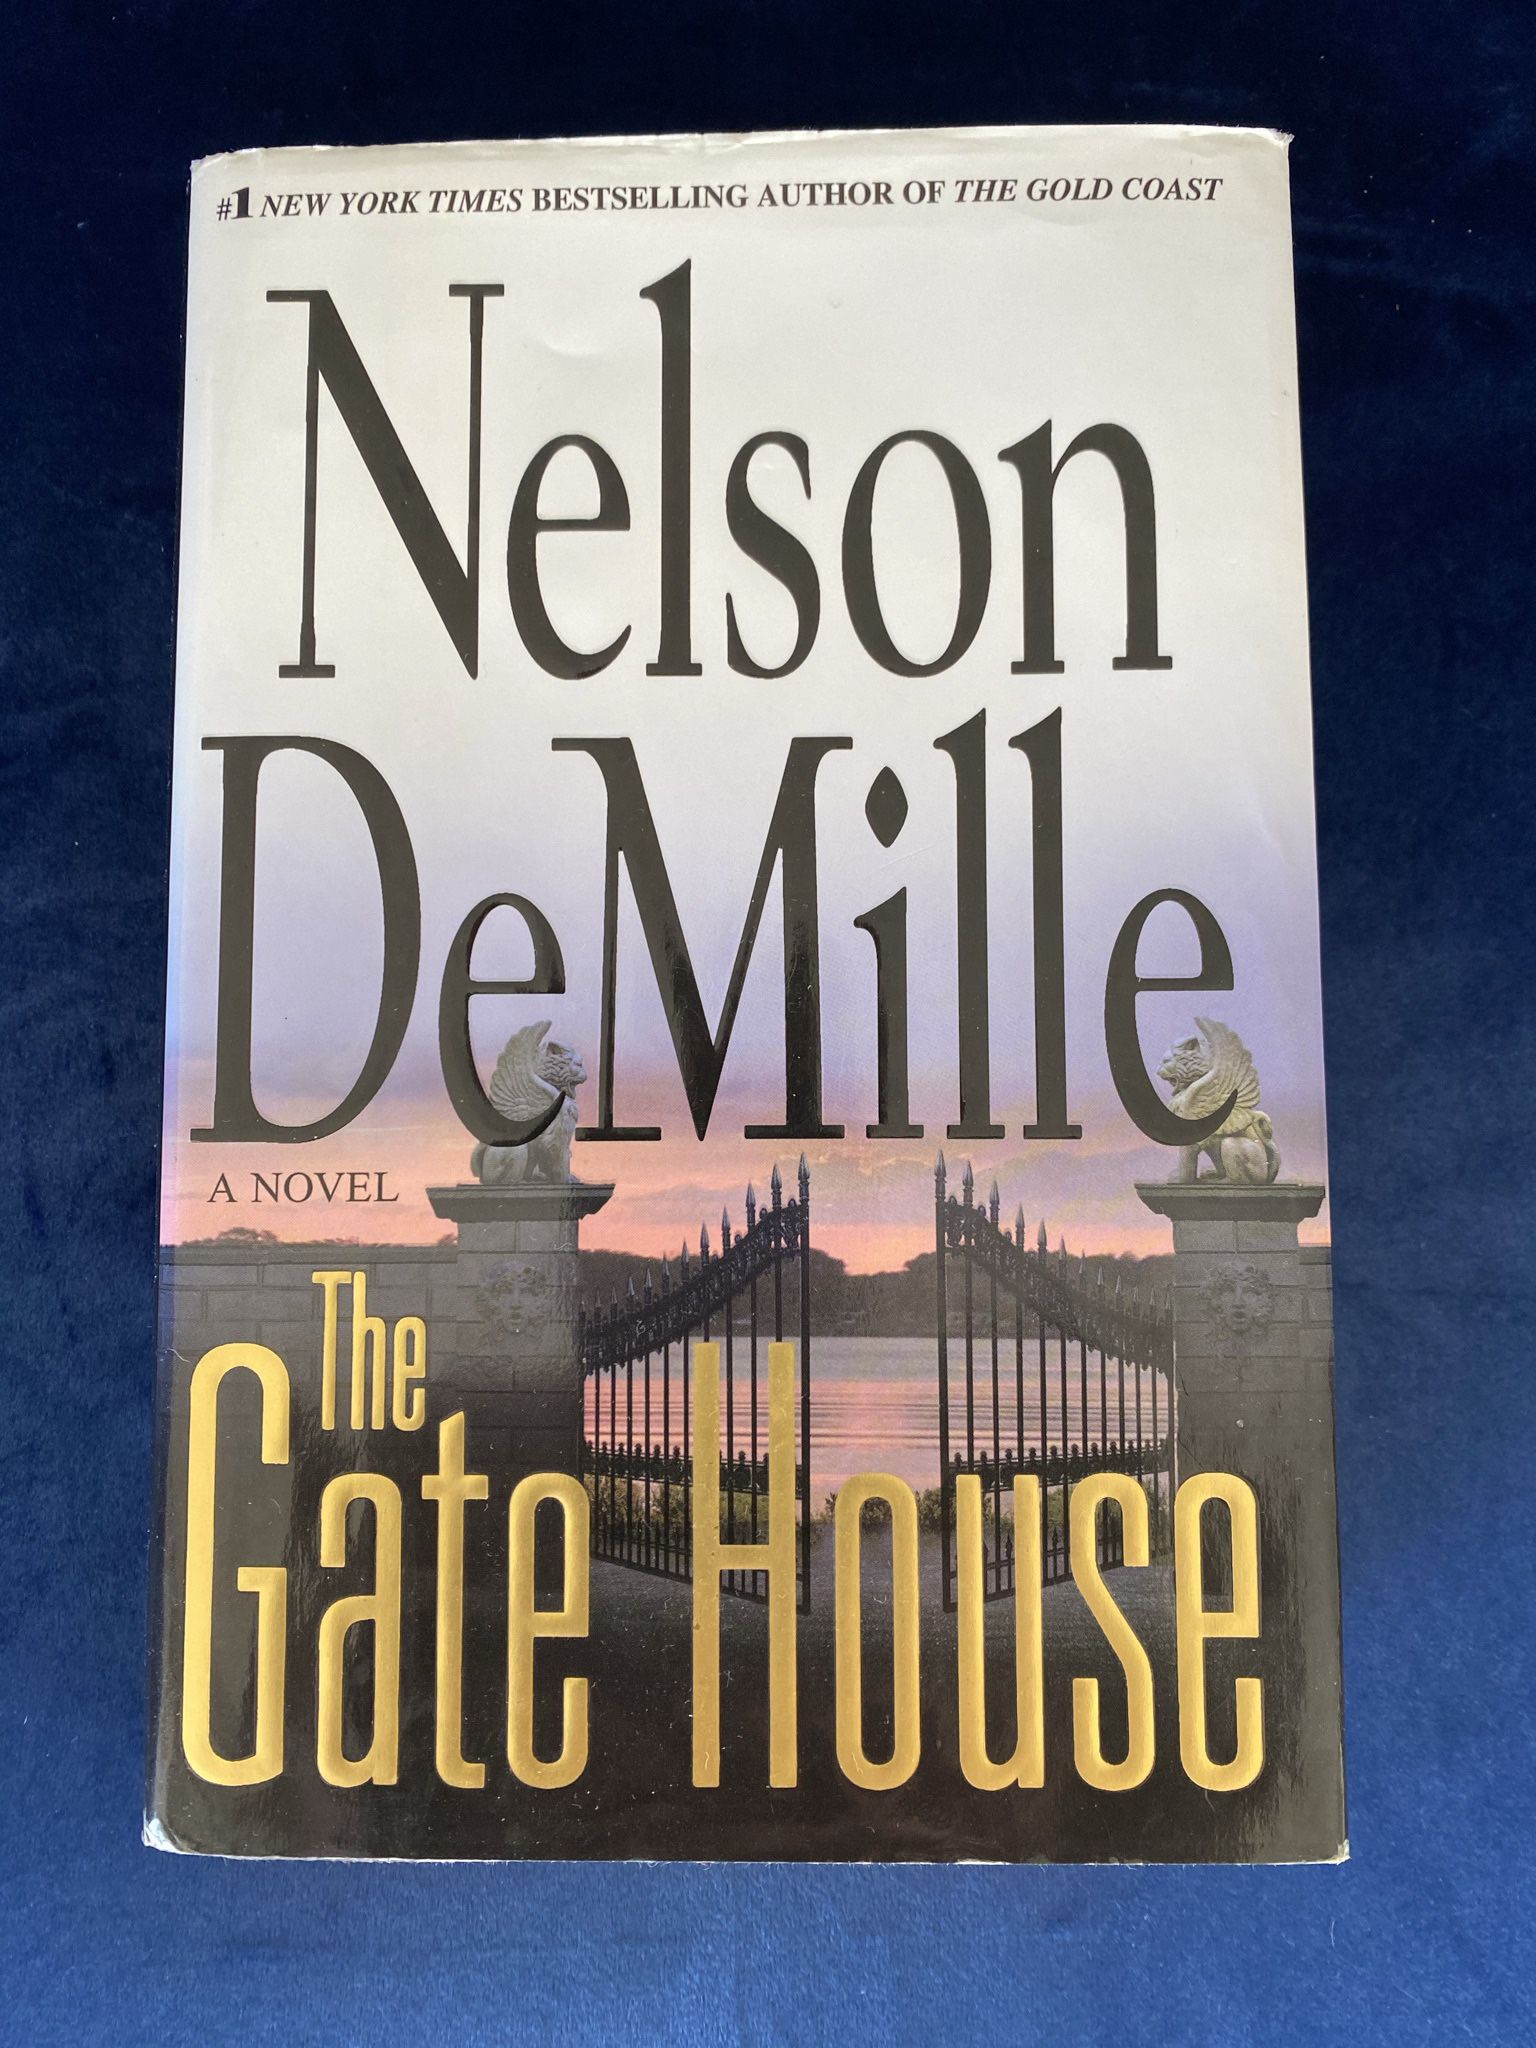 Bestseller book. Nelson DeMille. “The Gate House”. Like new condition. Great bargain. Look at other books on my list and buy all 5 for $25.